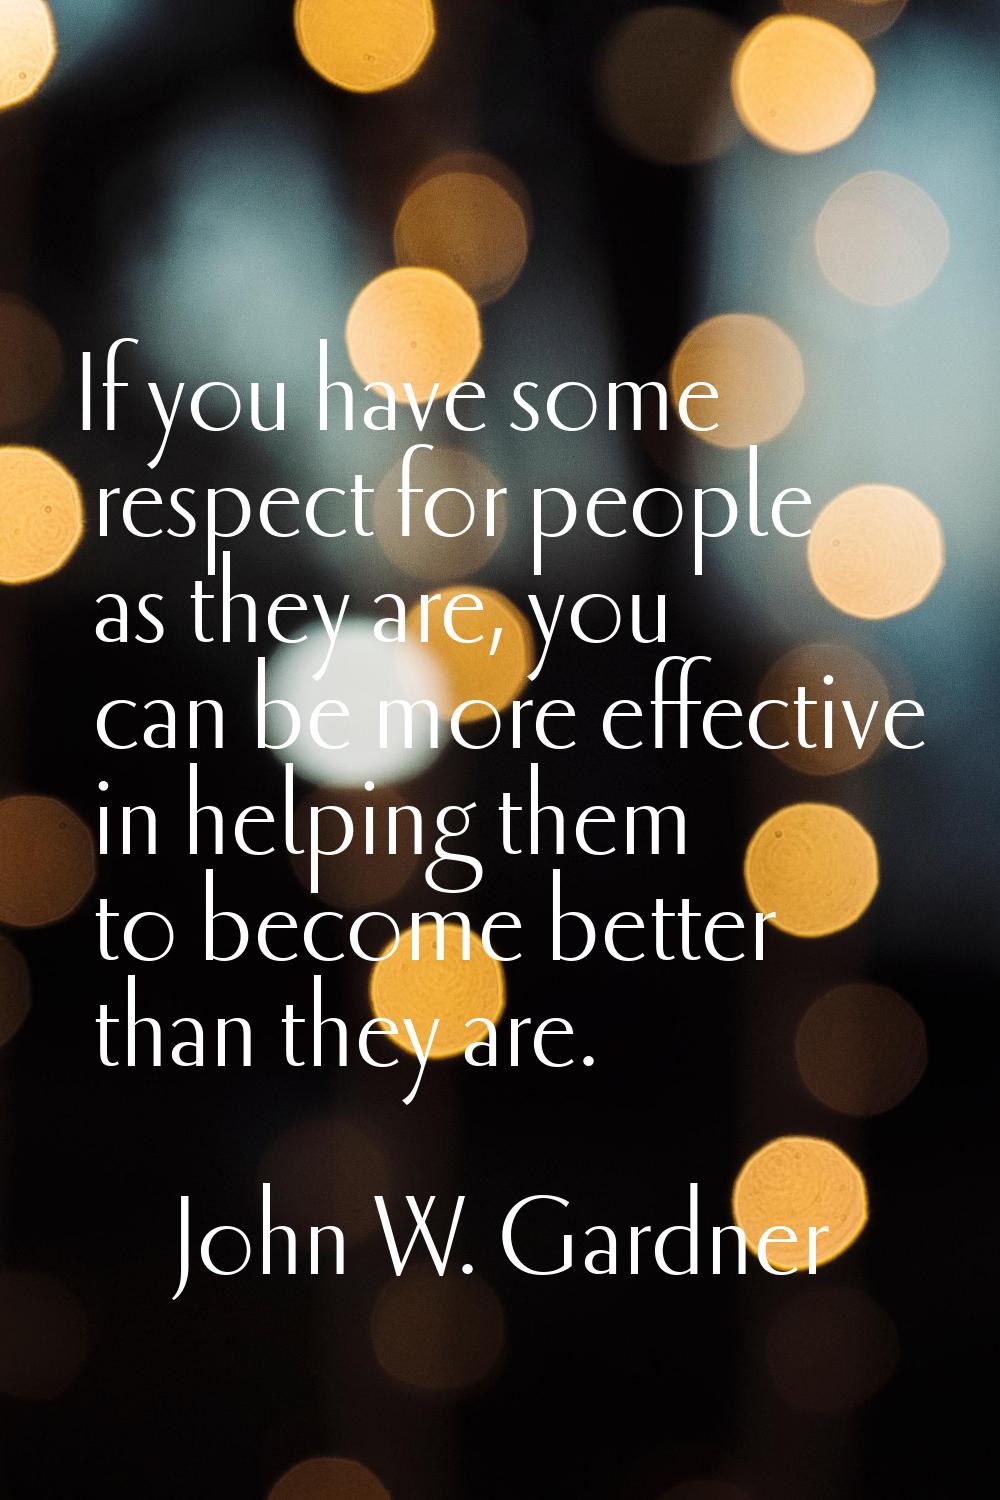 If you have some respect for people as they are, you can be more effective in helping them to becom